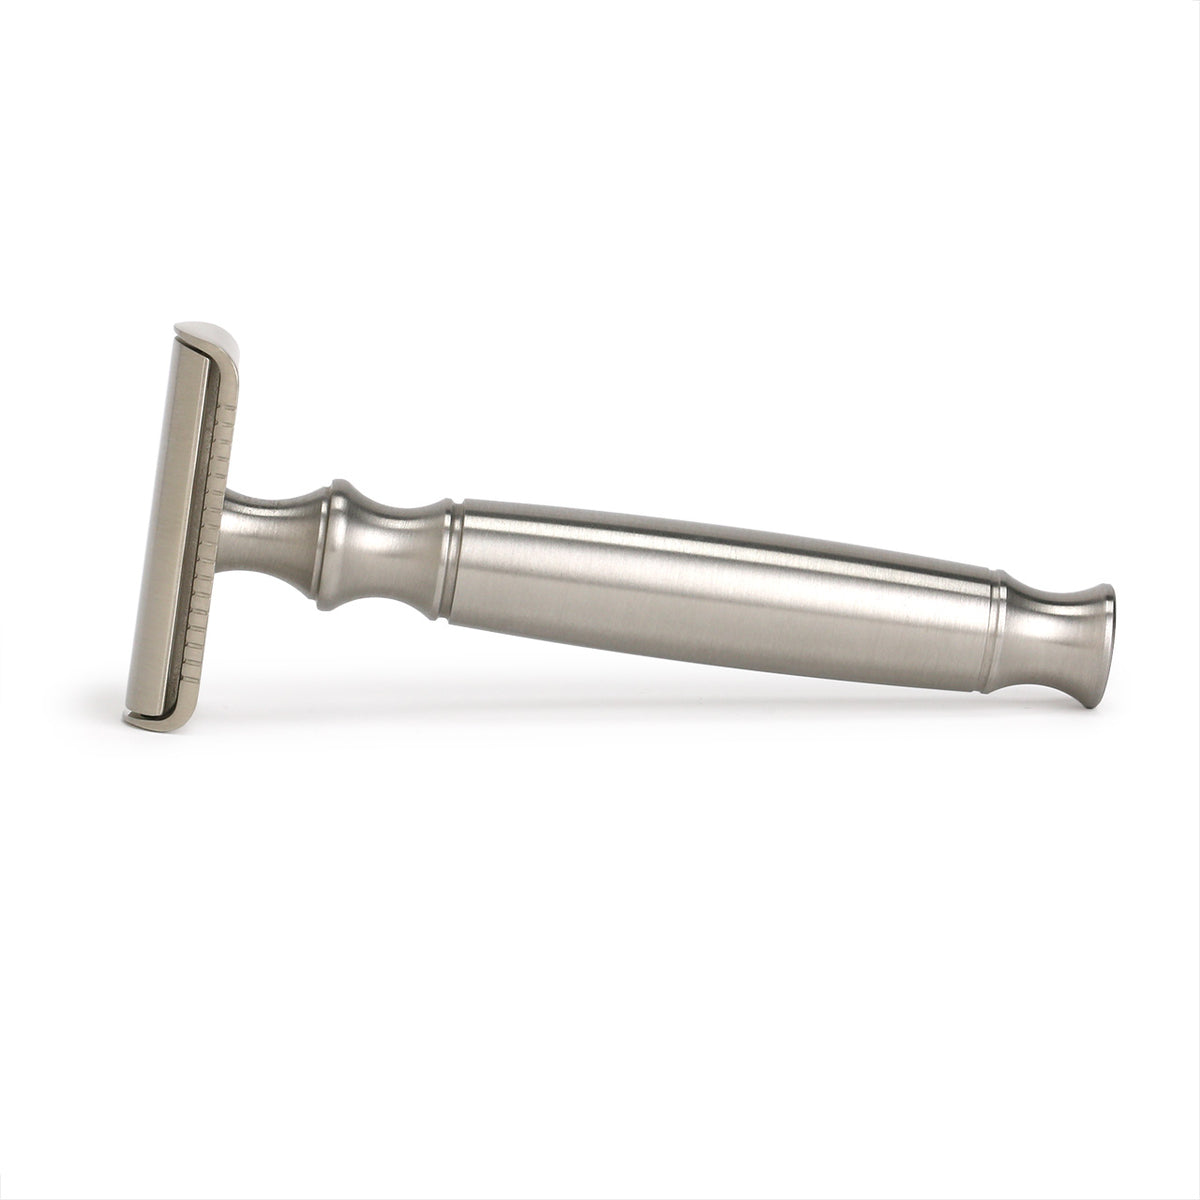 Hefty Safety Razor with Stainless Steel Handle